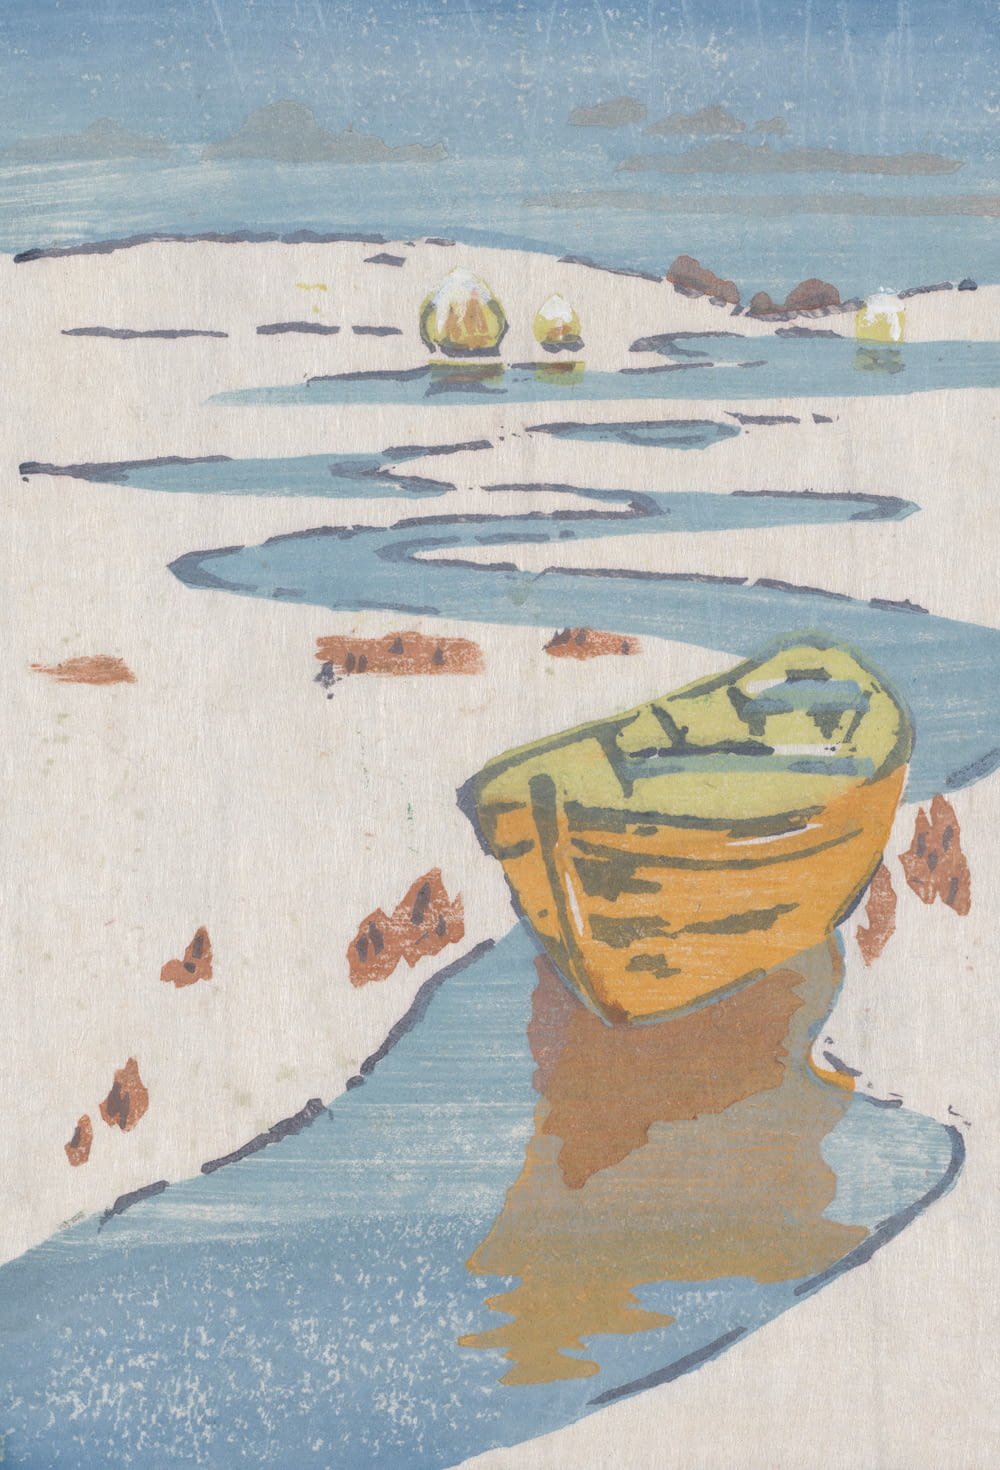 a painting of a yellow boat on a beach